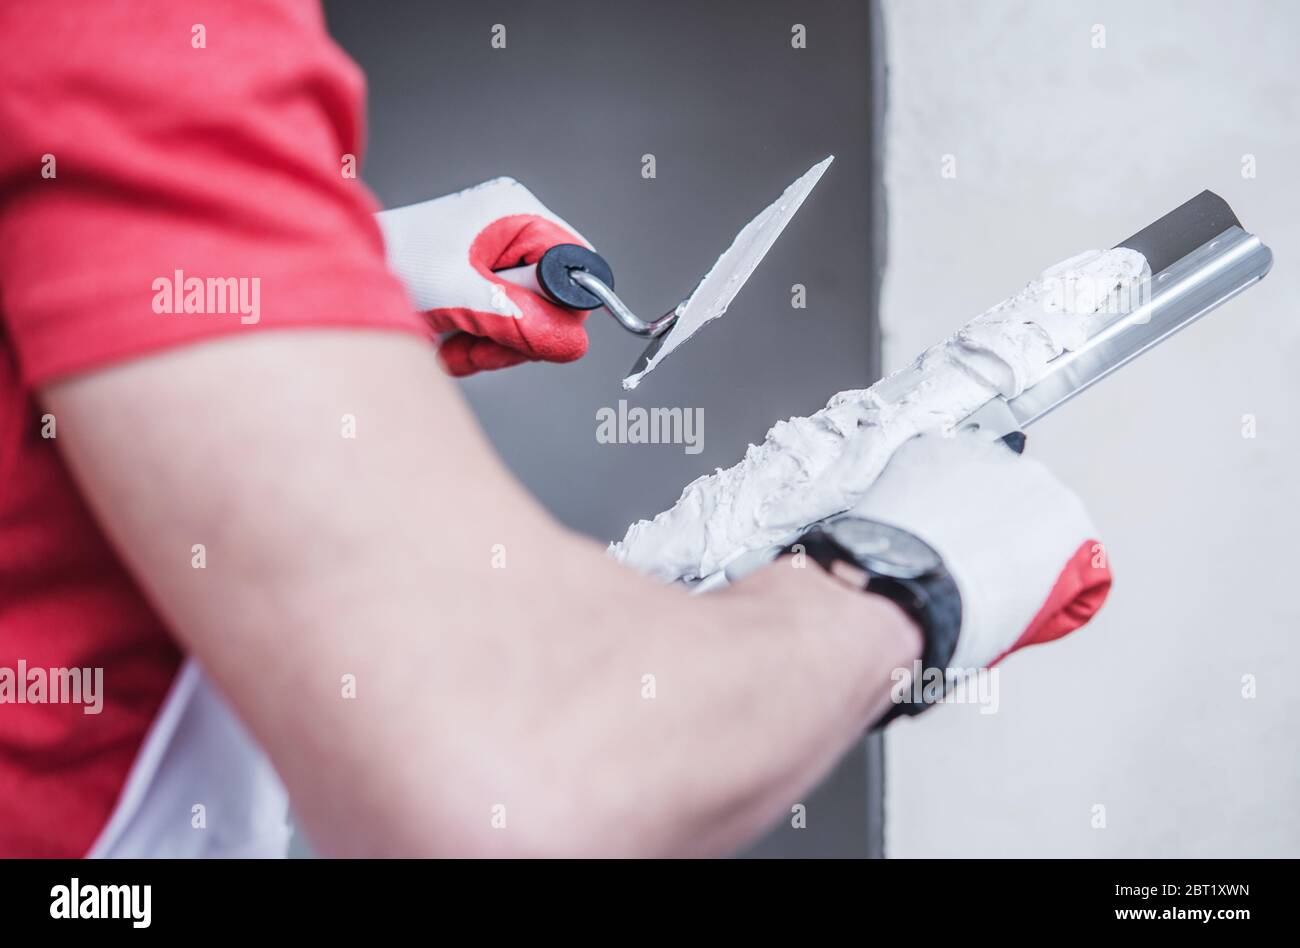 Close Up Of Construction Male Worker Applying Thin Coat Of Drywall Compound Using Professional Taping Knife. Stock Photo